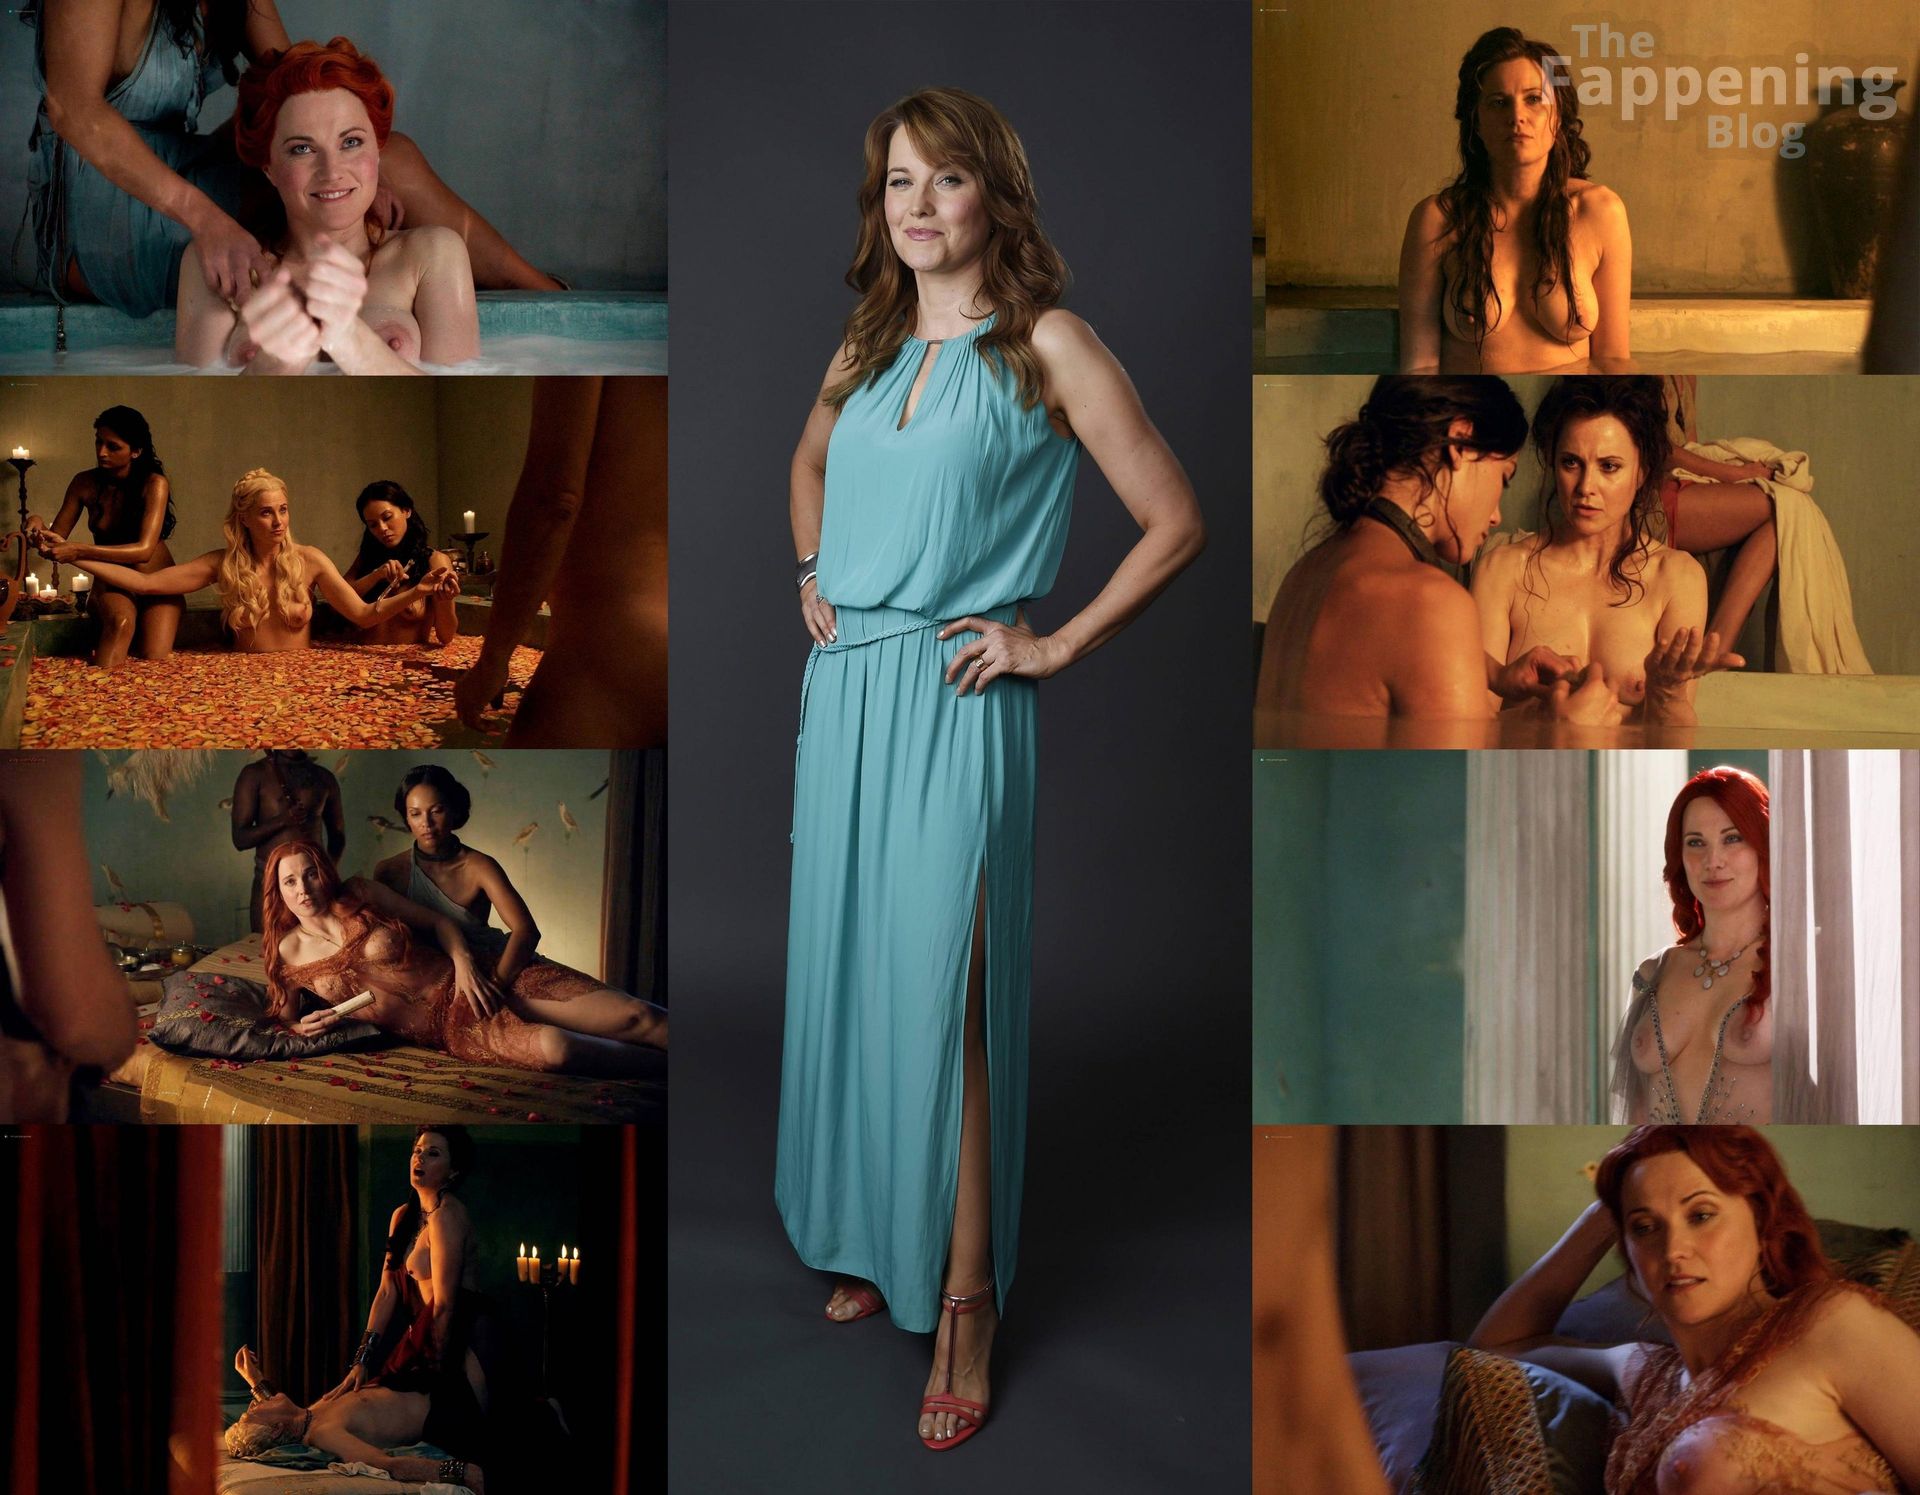 Lucy Lawless Nude 1 Collage Photo.jpg